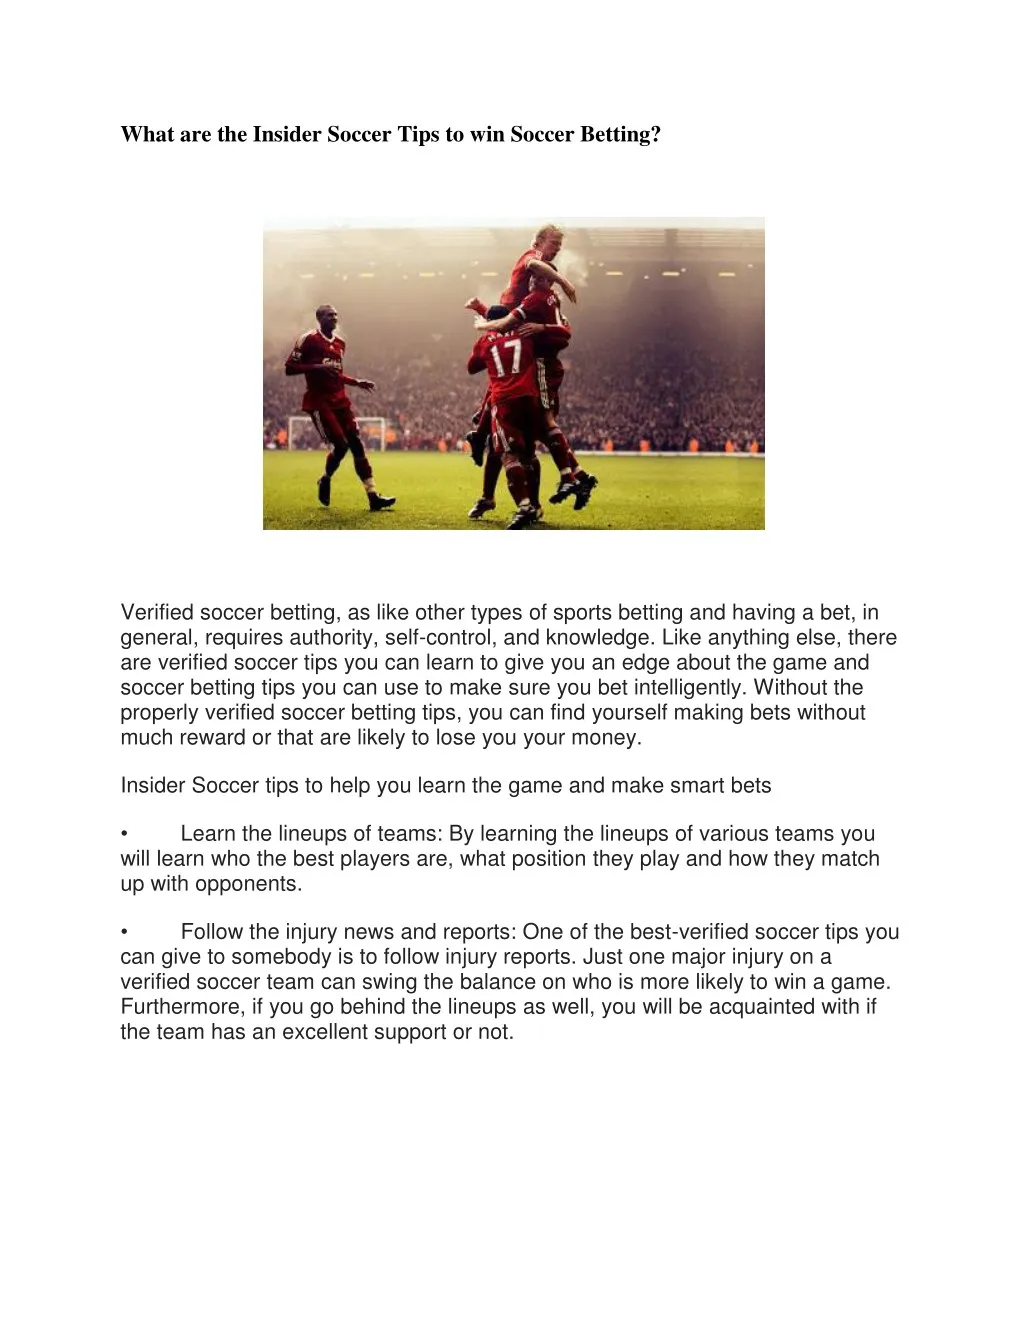 what are the insider soccer tips to win soccer